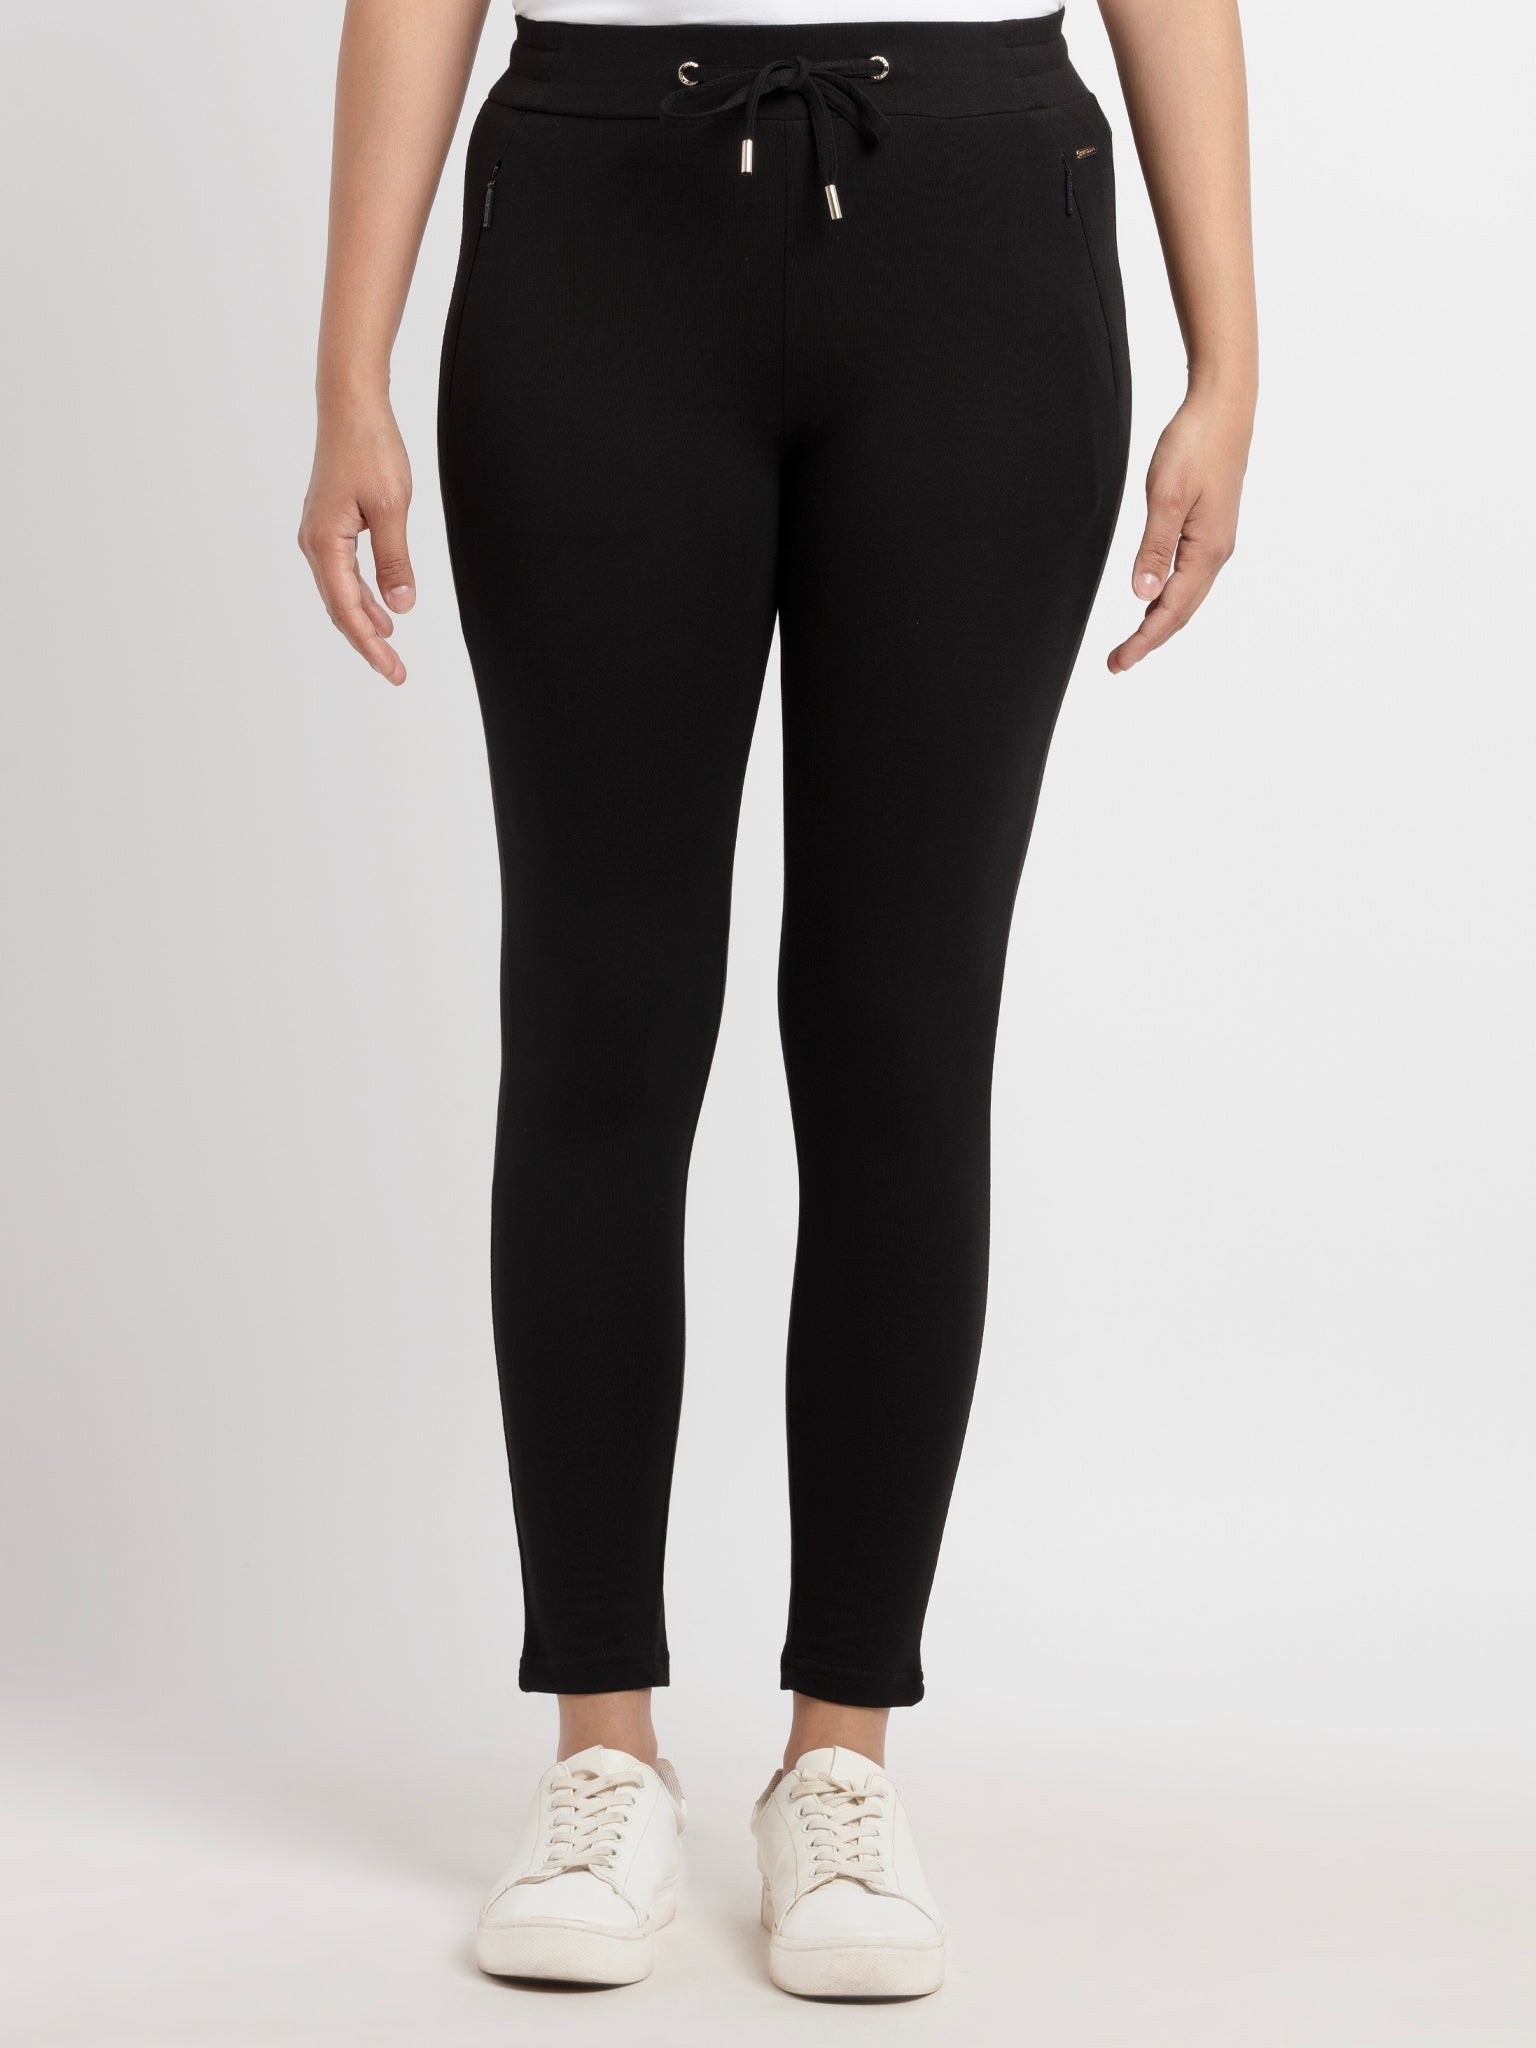 Status Quo | Women'ss Ankle length Solid Joggers